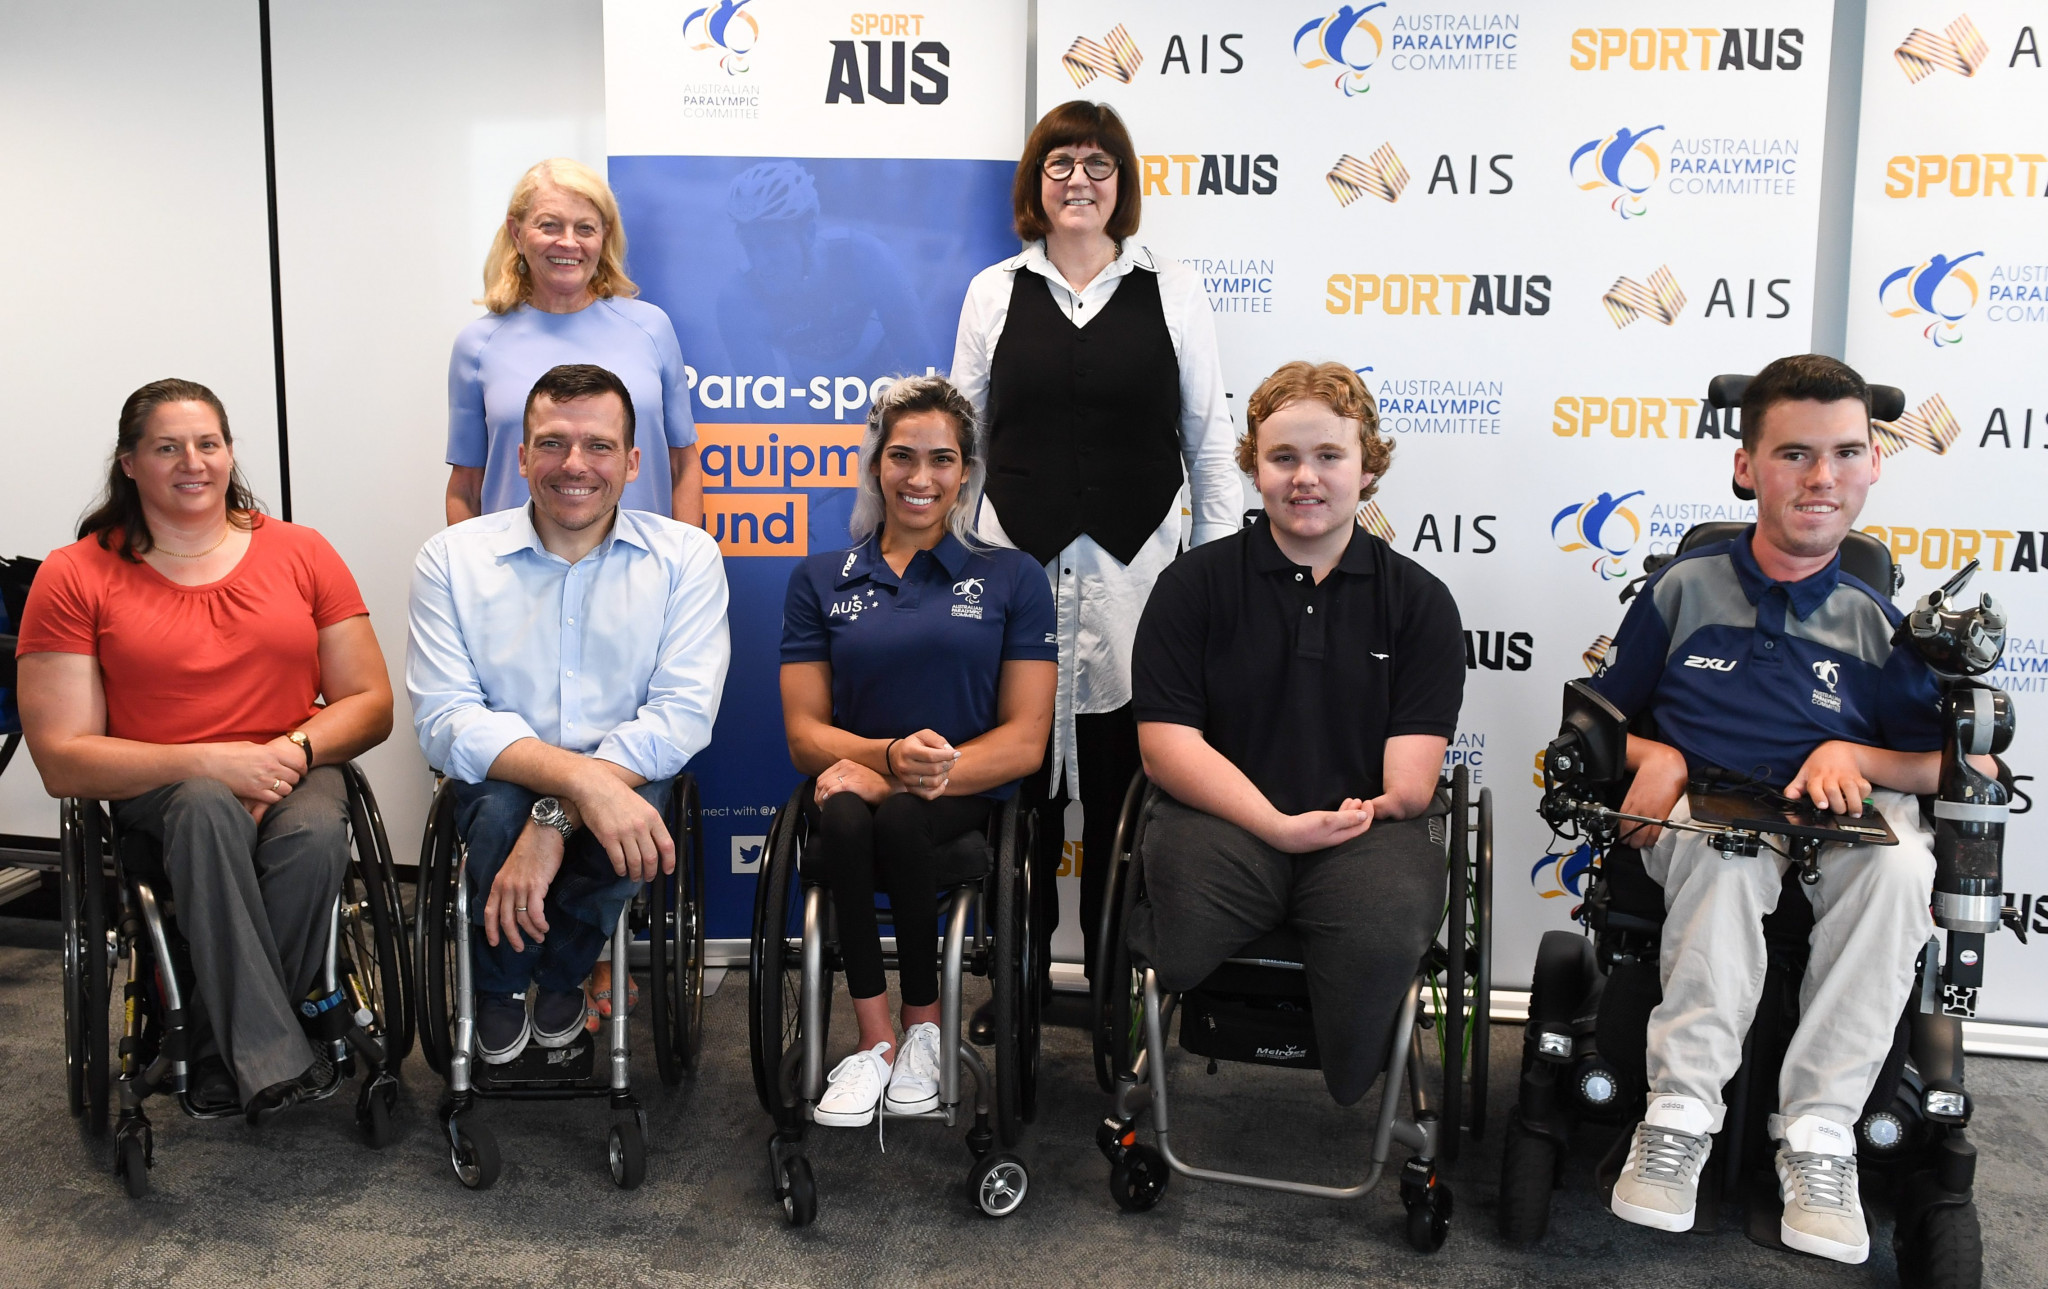 New scheme launched to help support cost of equipment for Australian athletes competing in Para-sport